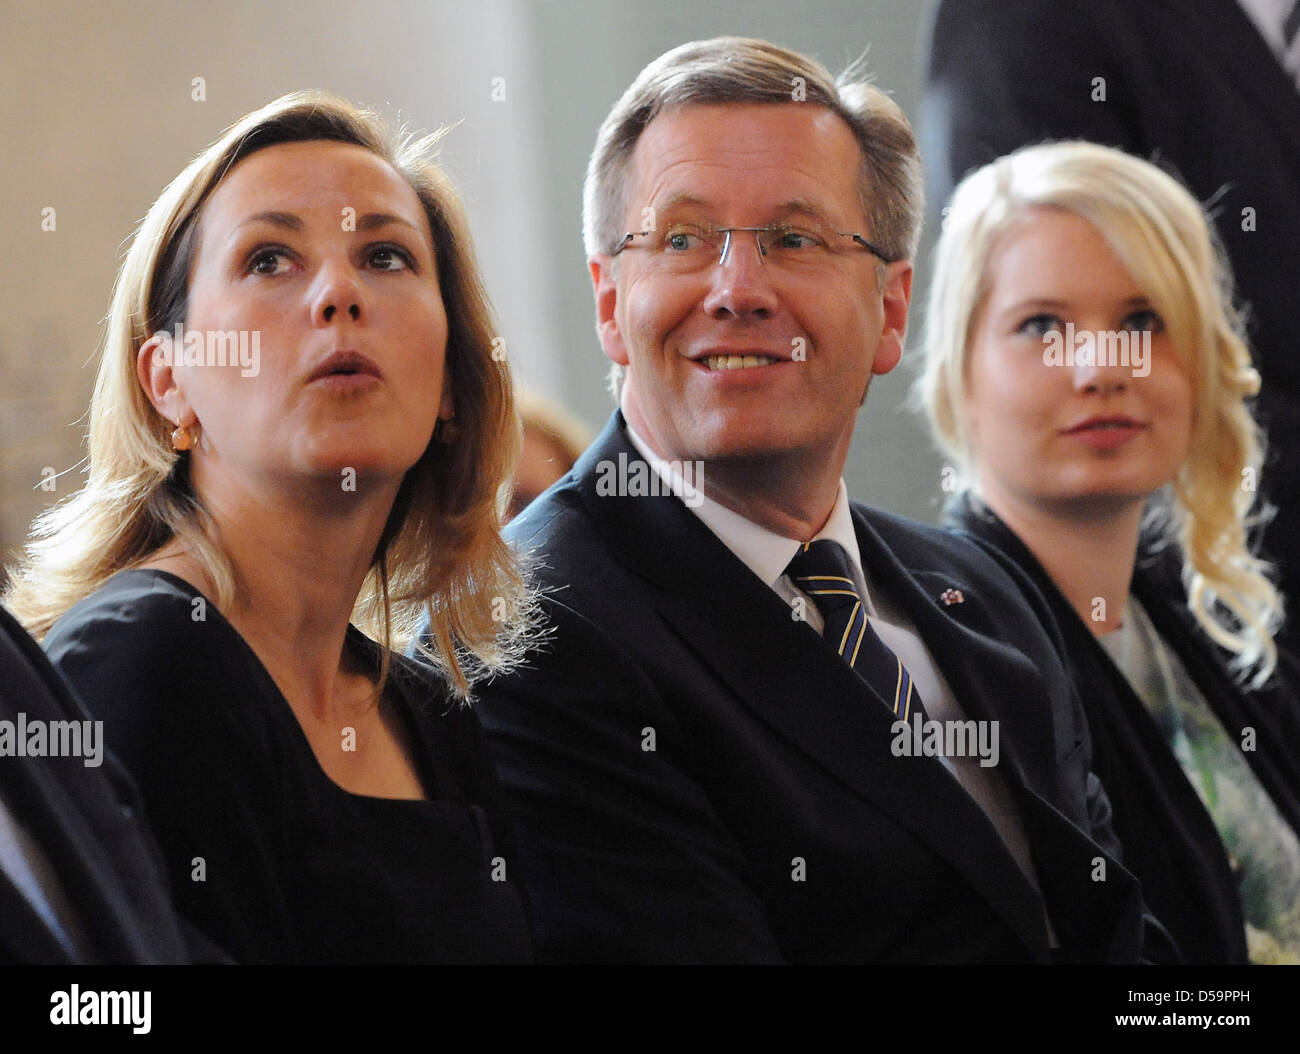 Presidential candidate Christian Wulff (C), his wife Bettina Wulff (L), and his daughter from first marriage Annalena (R) arrive for an ecumenical church service at St Hedwig cathedral in Berlin, Germany, 30 June 2010. The Federal Convention will elect the next German President later the day. Photo: Tobias Kleinschmidt Stock Photo